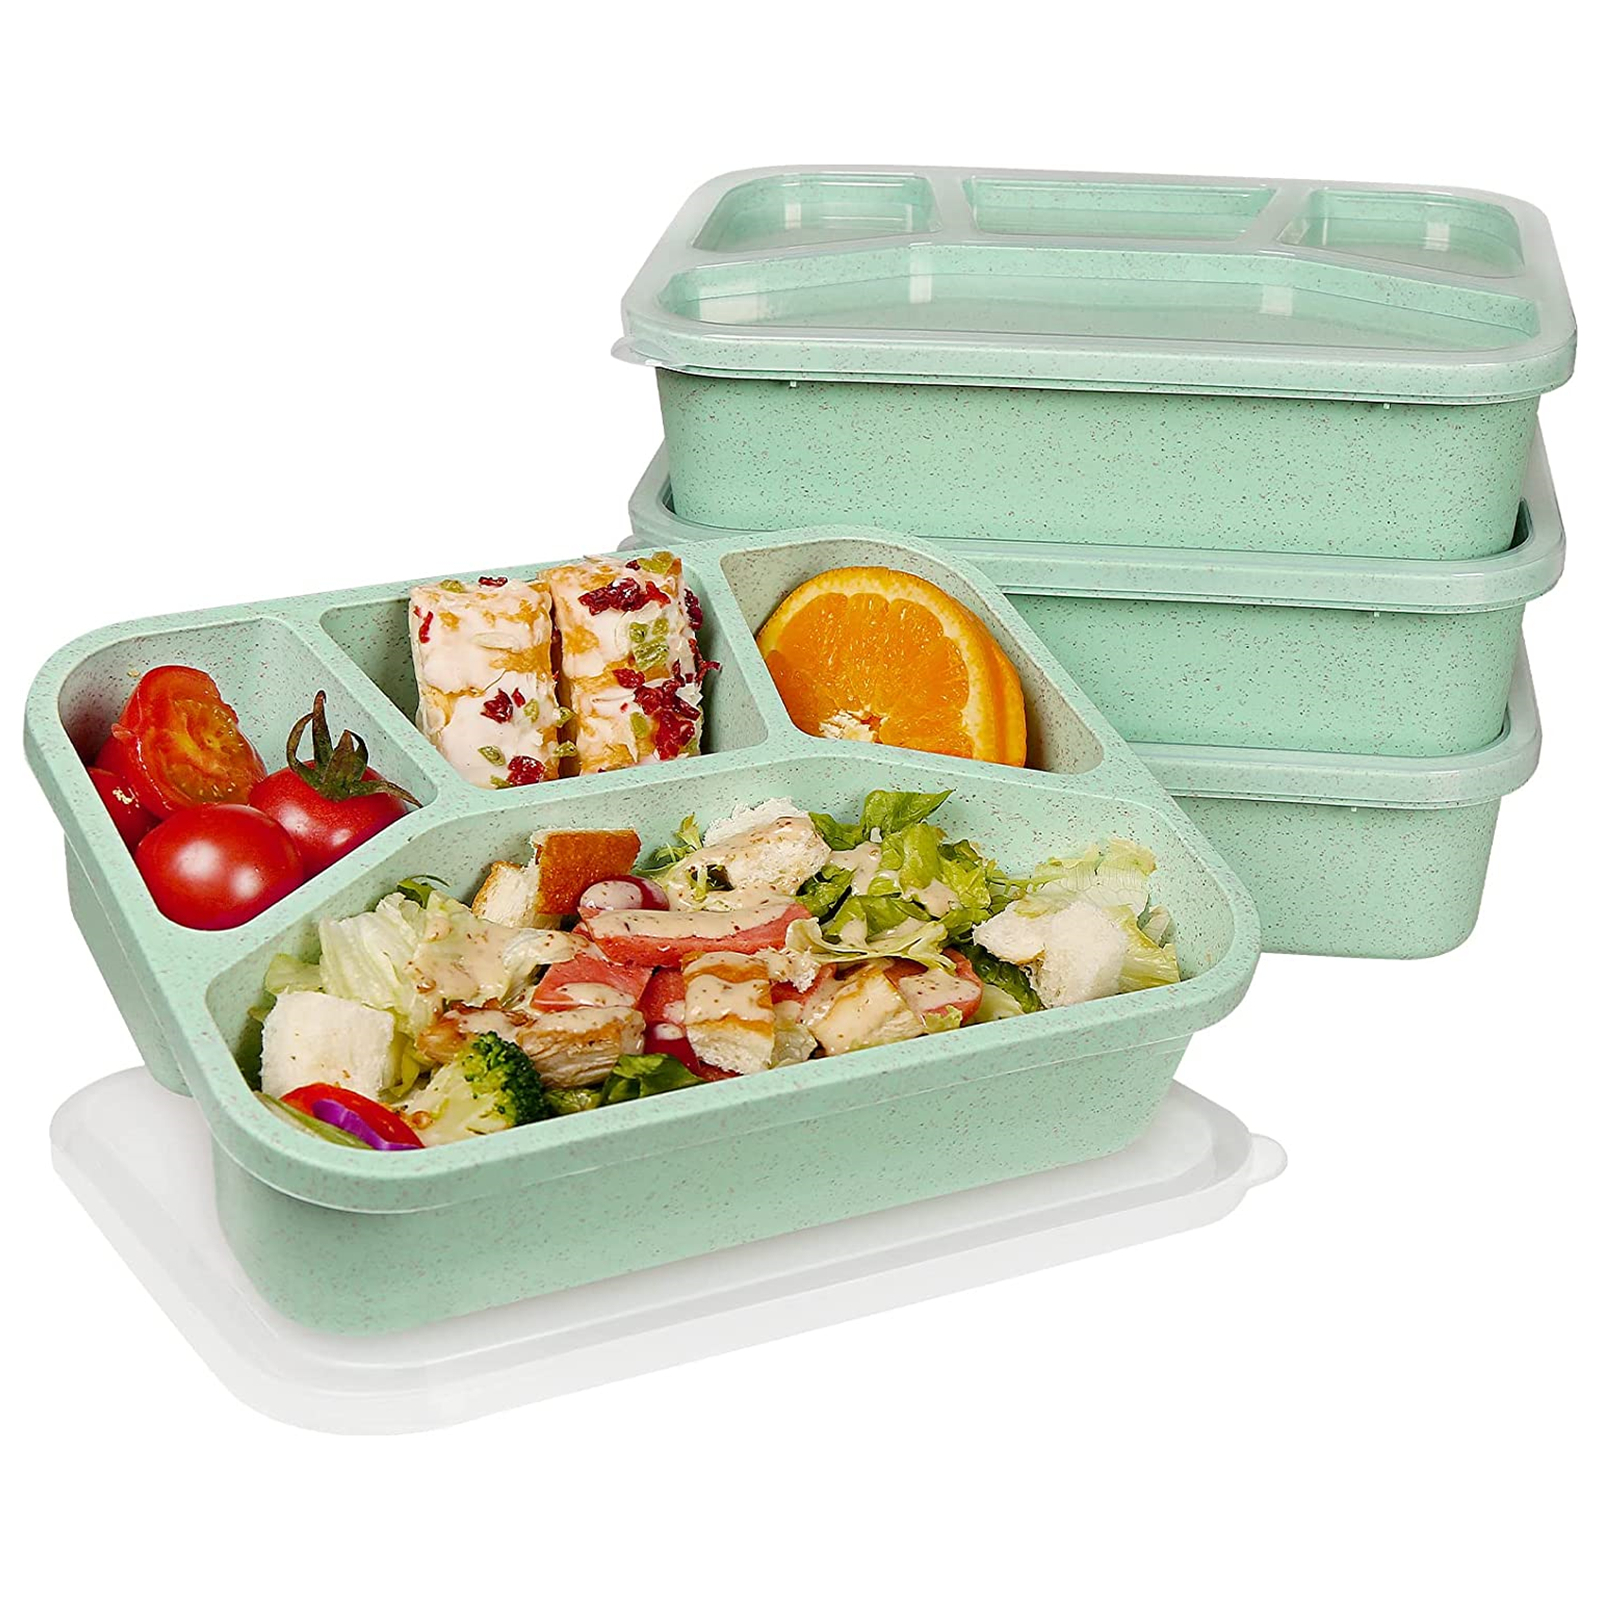 Shopwithgreen Meal Prep Plastic Lunch Containers with 4 Compartments 4 pcs  - Creamy White